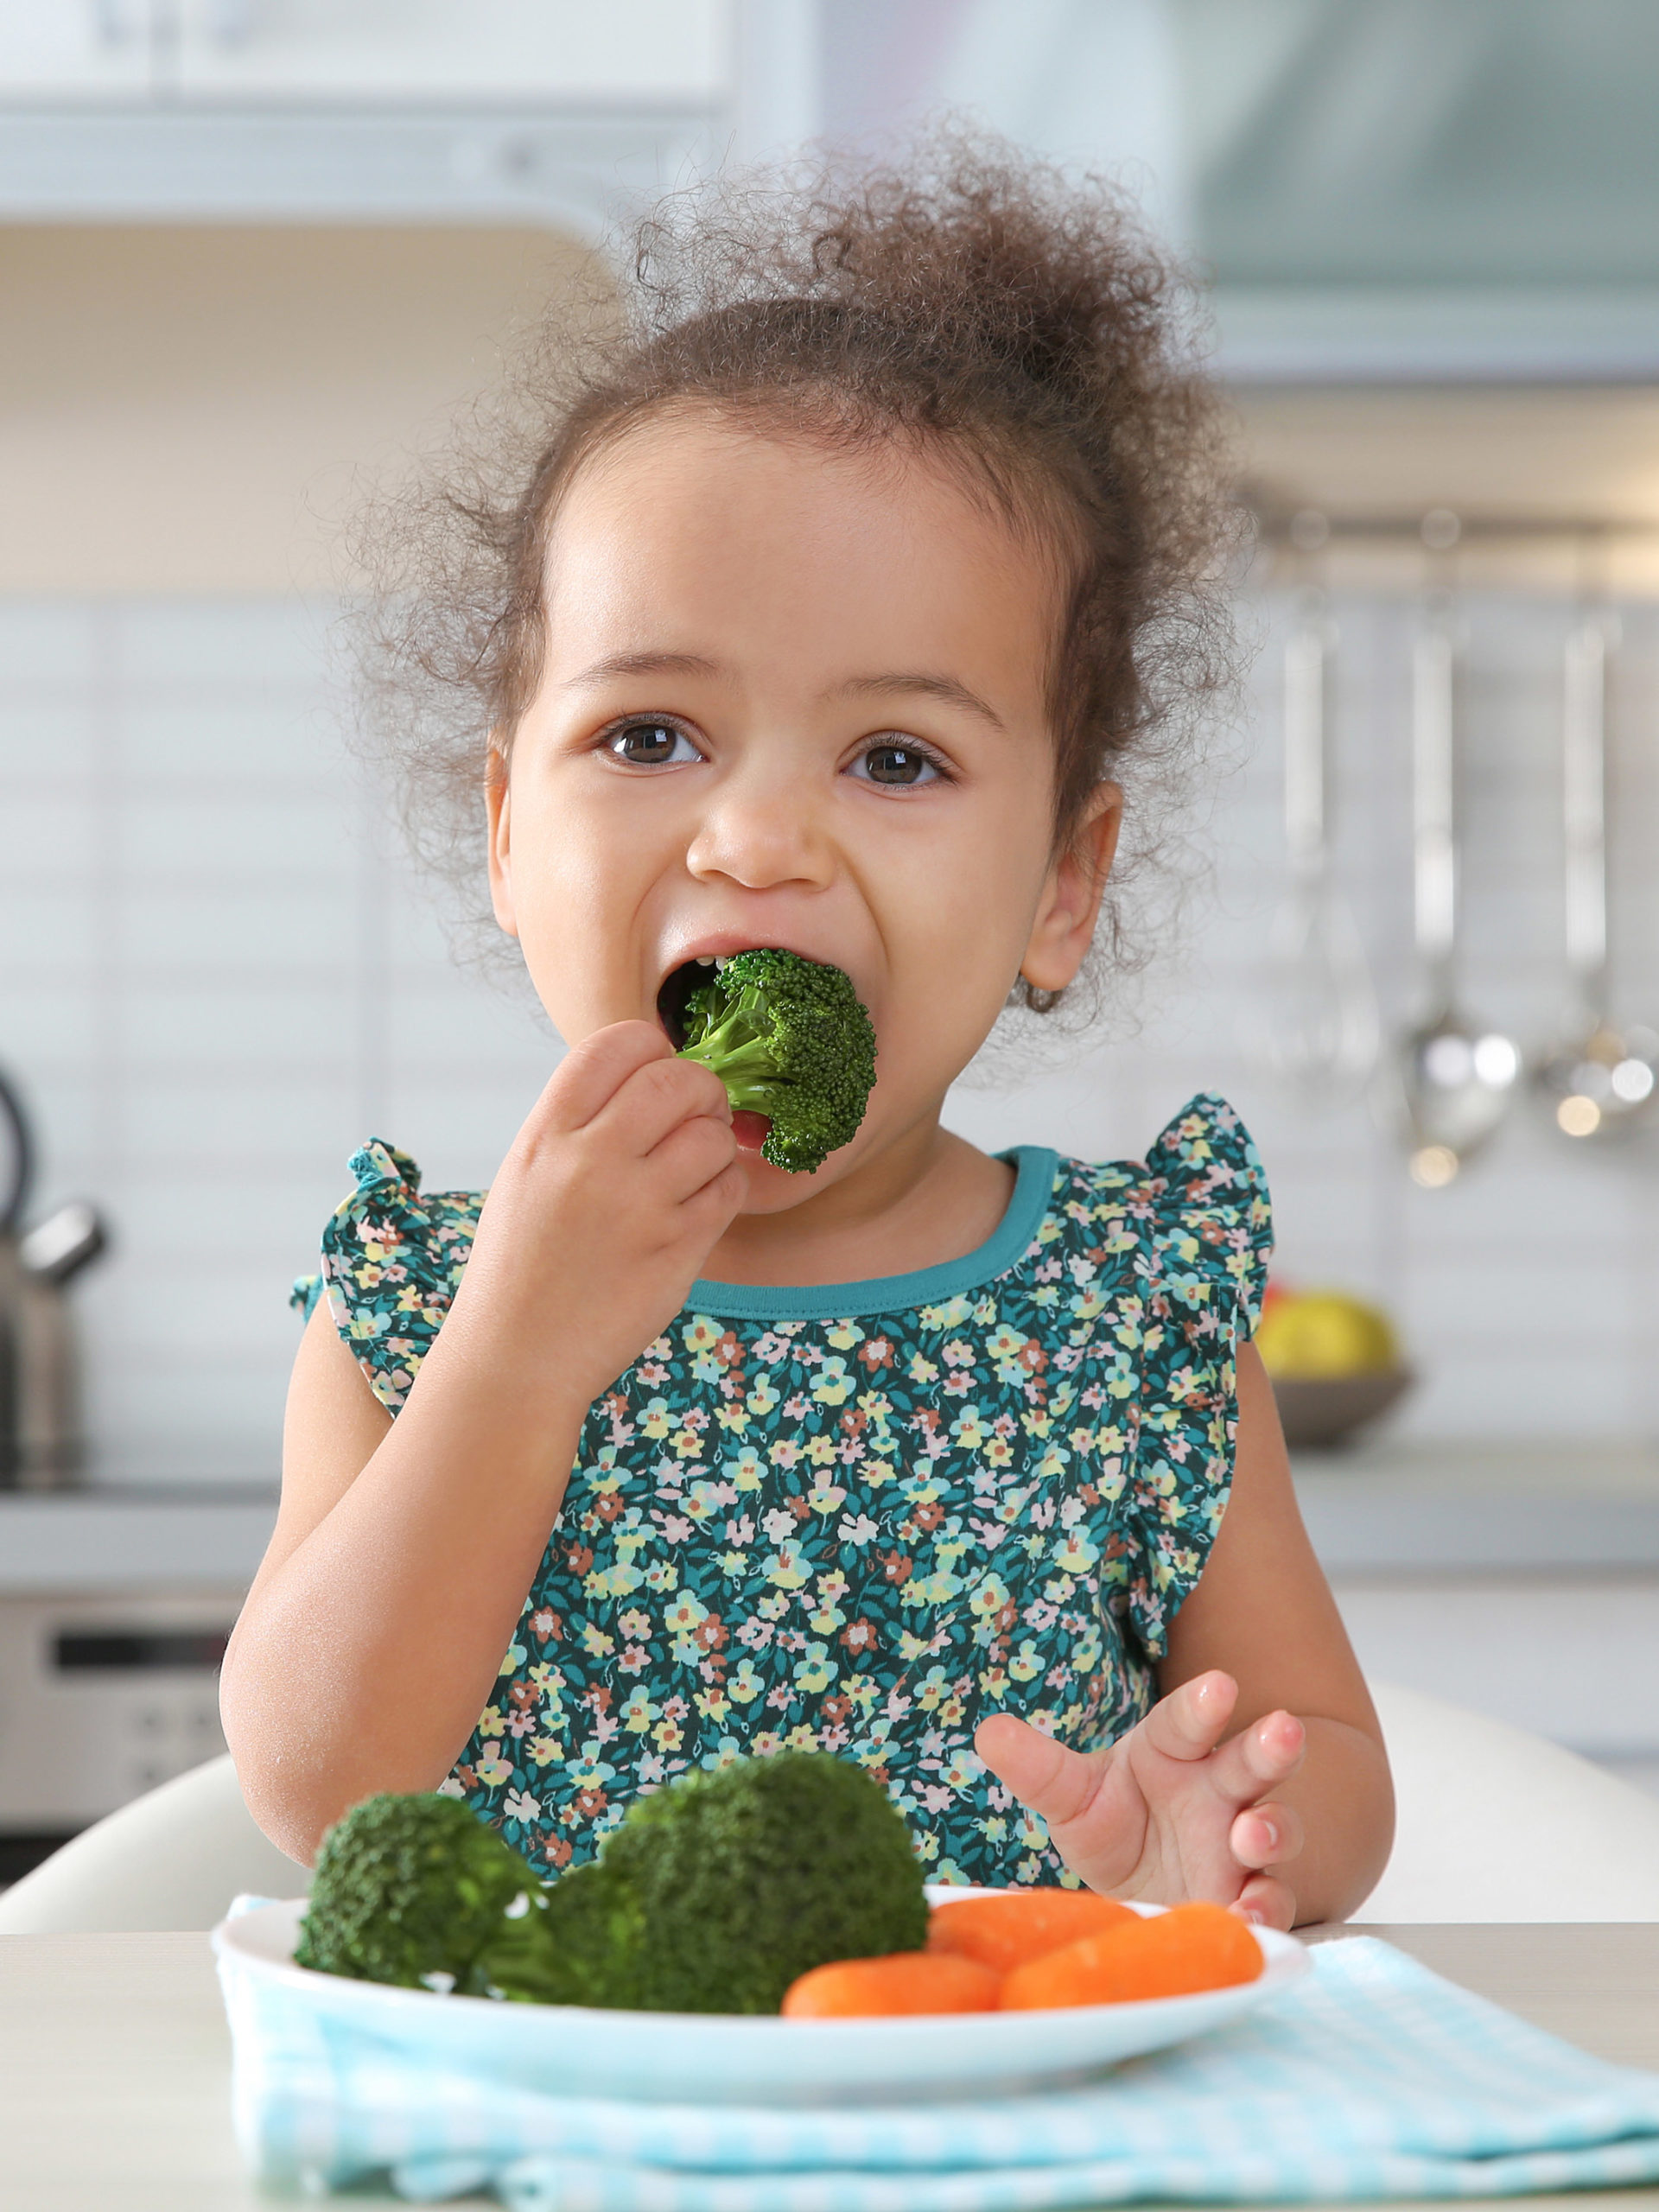 little girl eating broccoli and carrots in kitchen